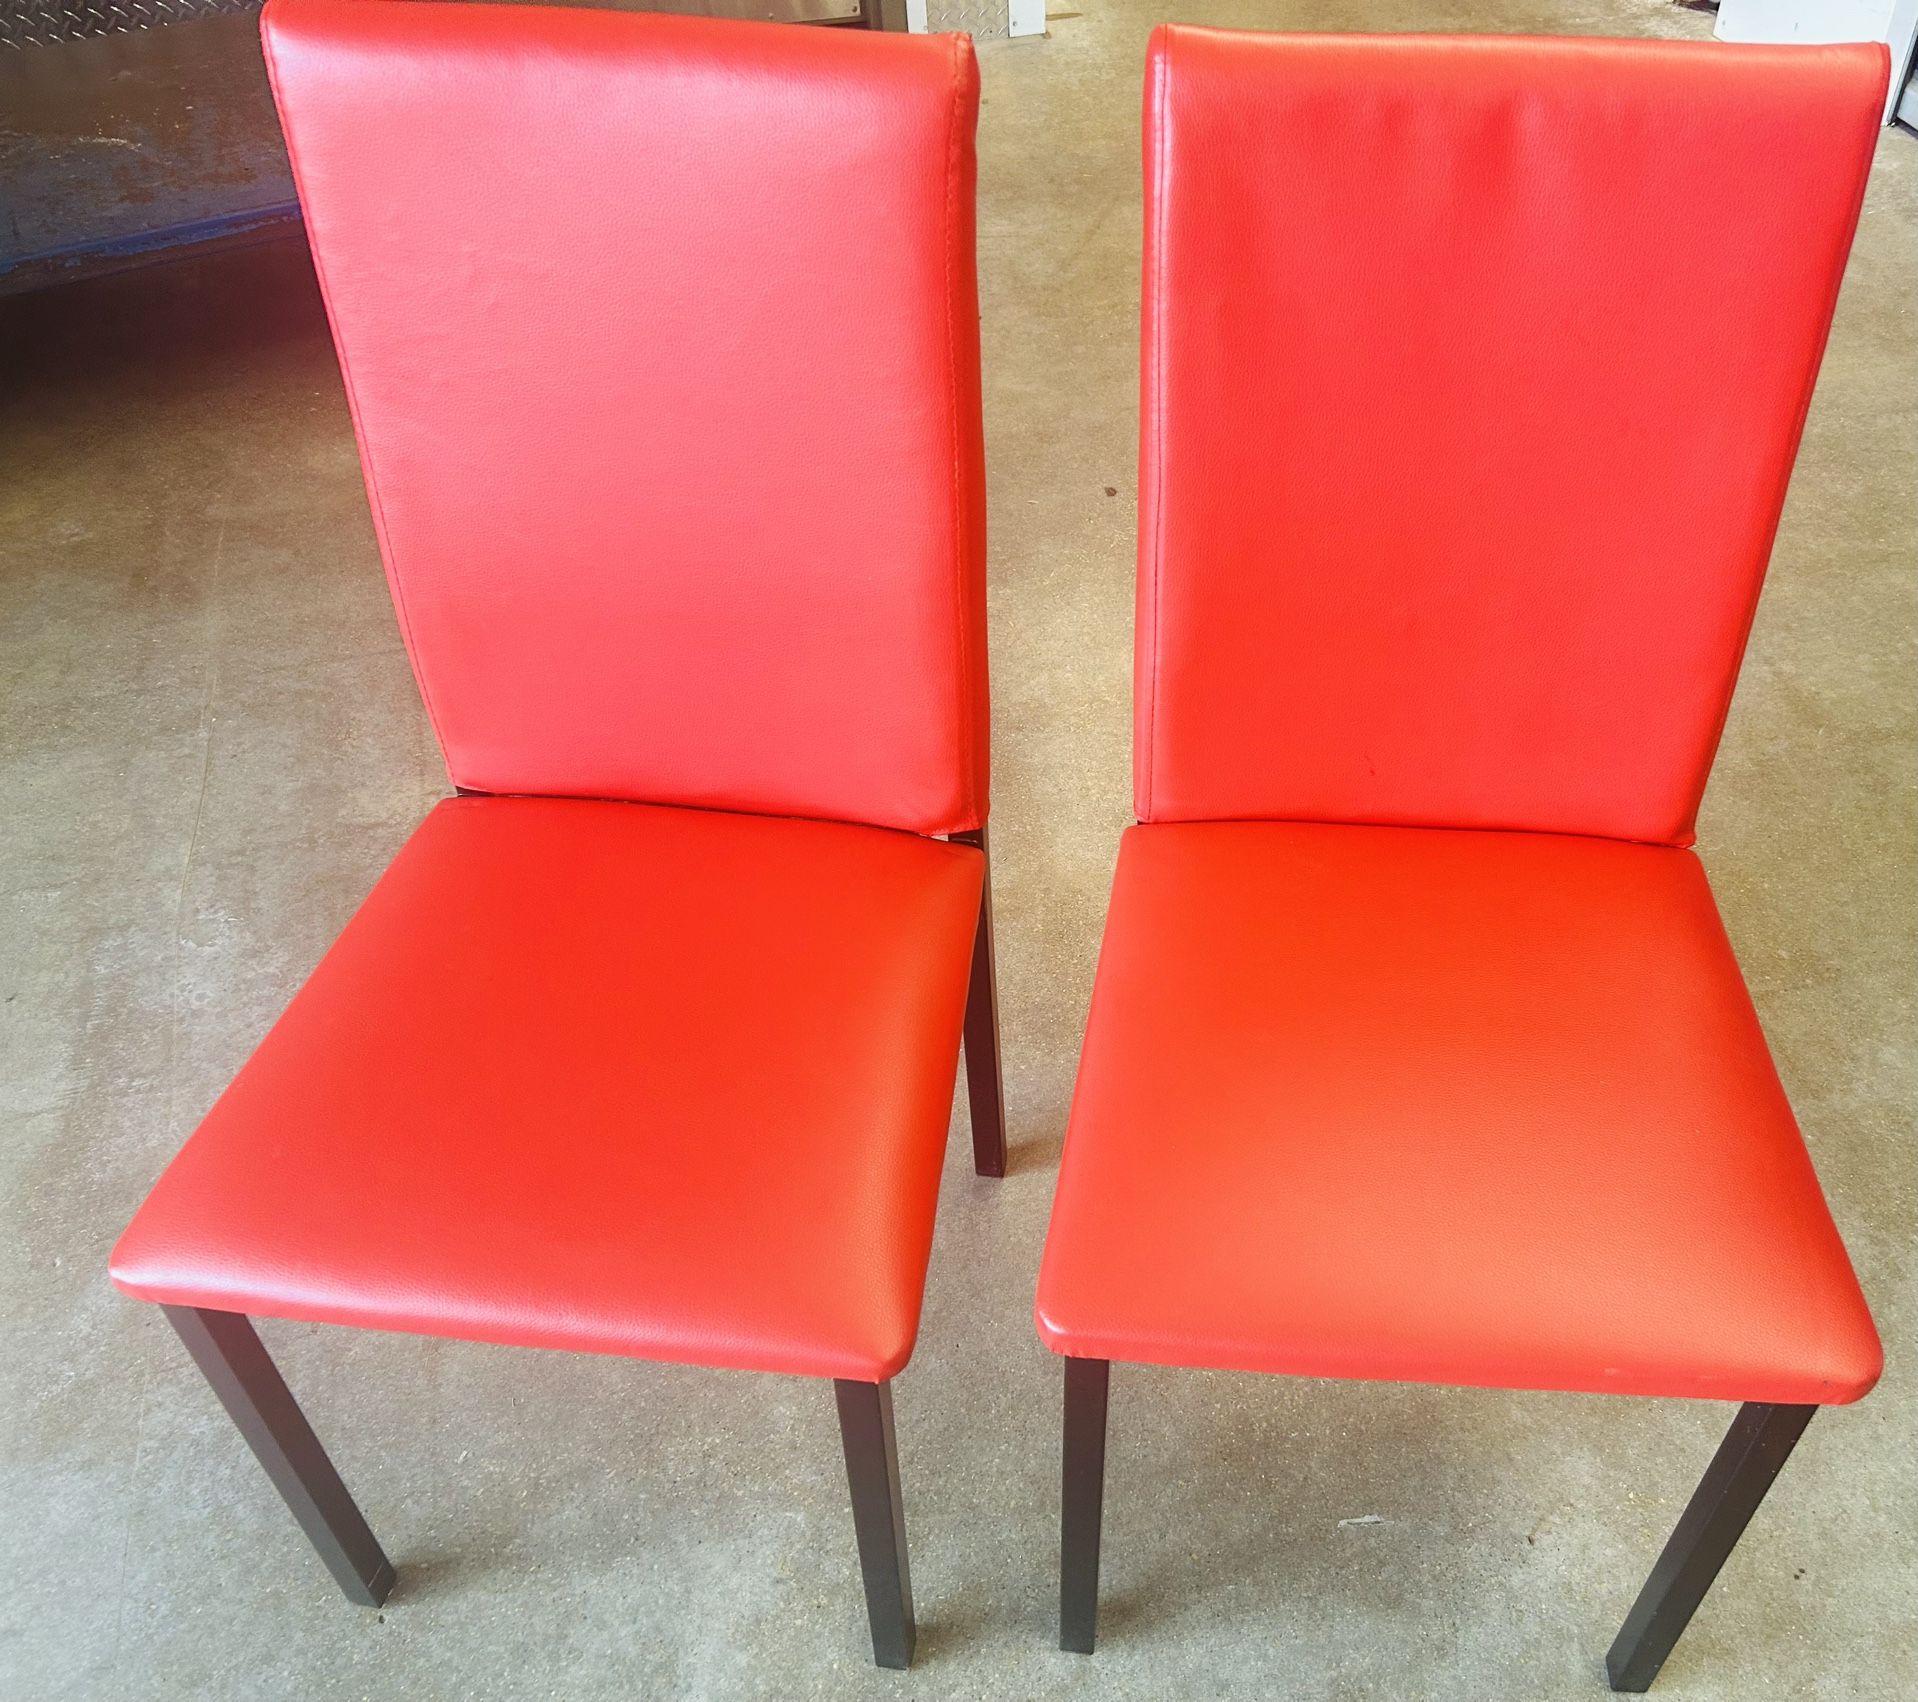 Two Leather Chairs  Like New Condition 